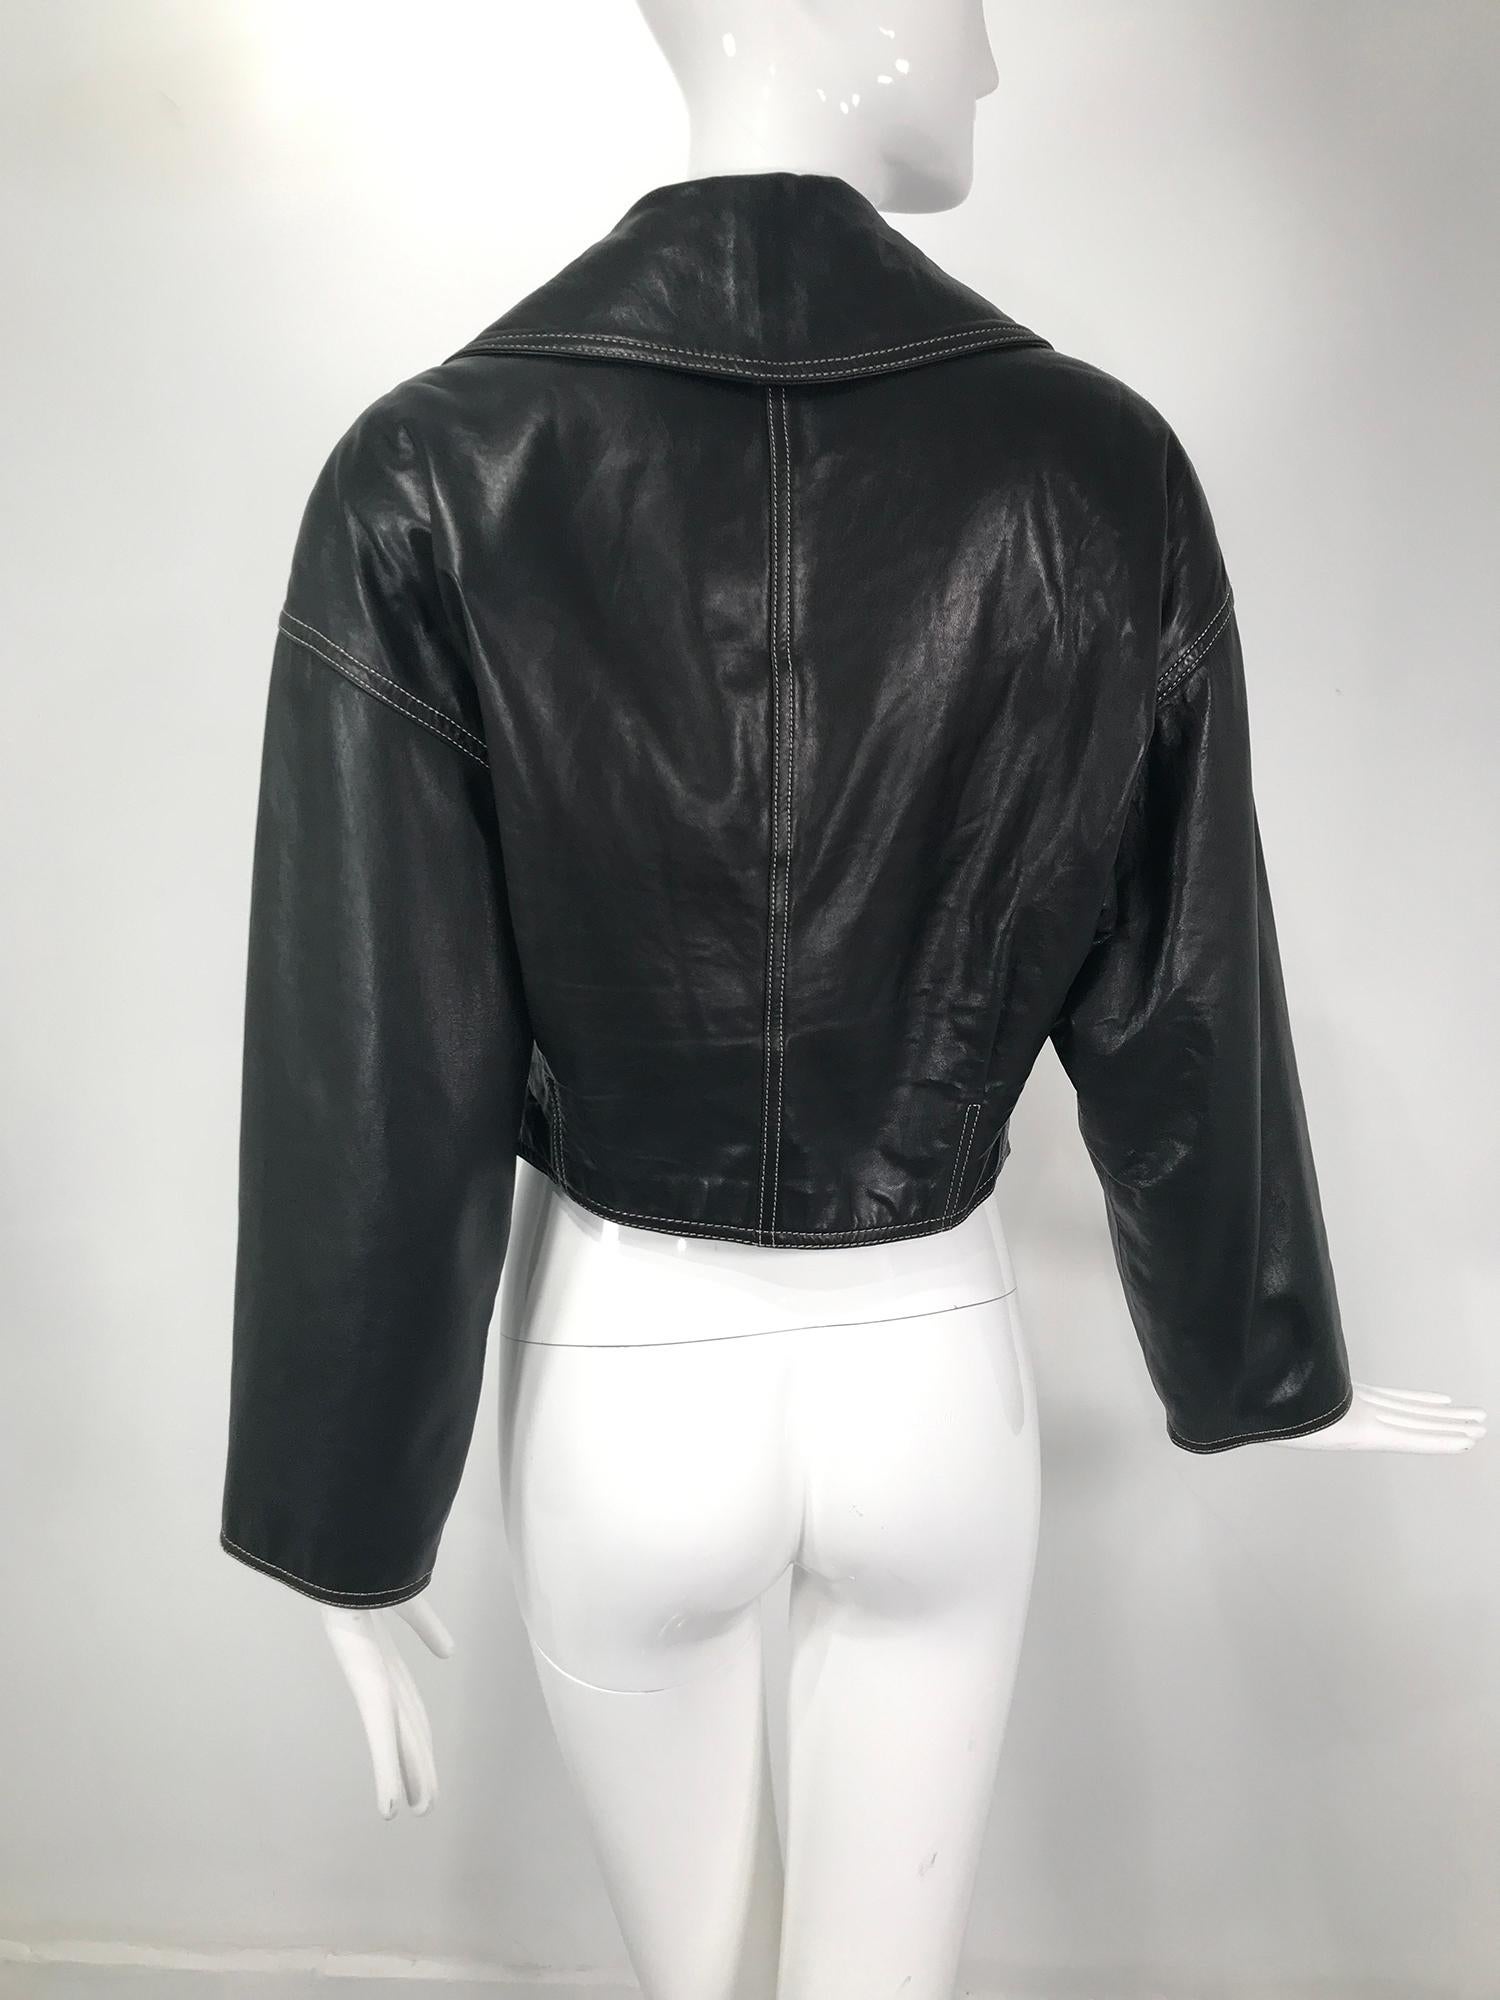 Women's Genny Black Leather Bomber Jacket With Rhinestone Buttons & Gold Stitching 1980s For Sale